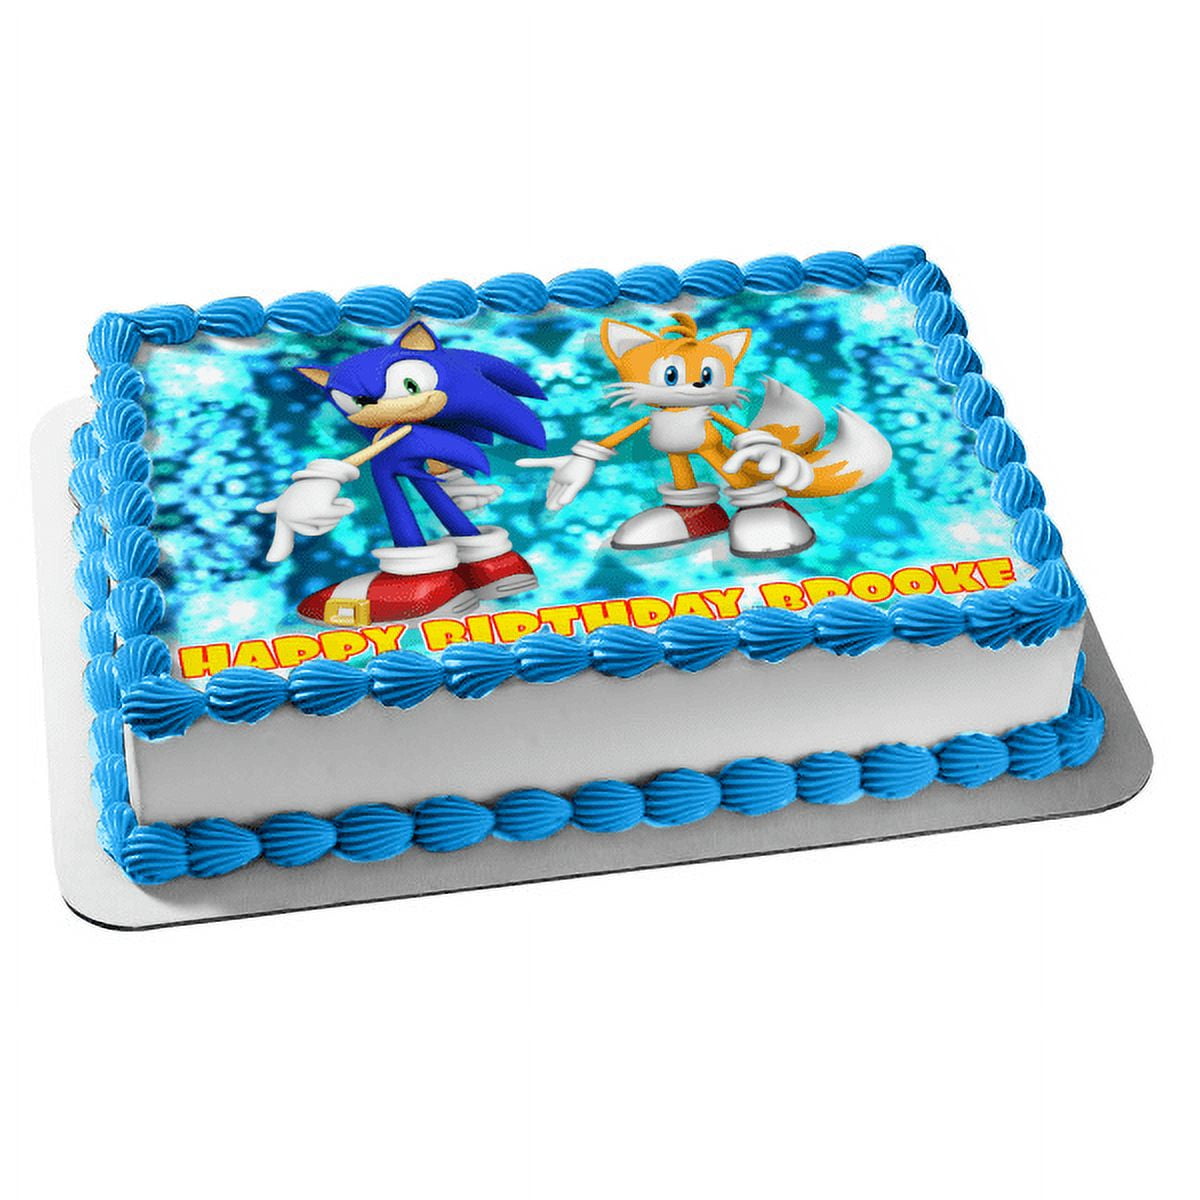 Sonic X Edible Cake Toppers – Cakecery